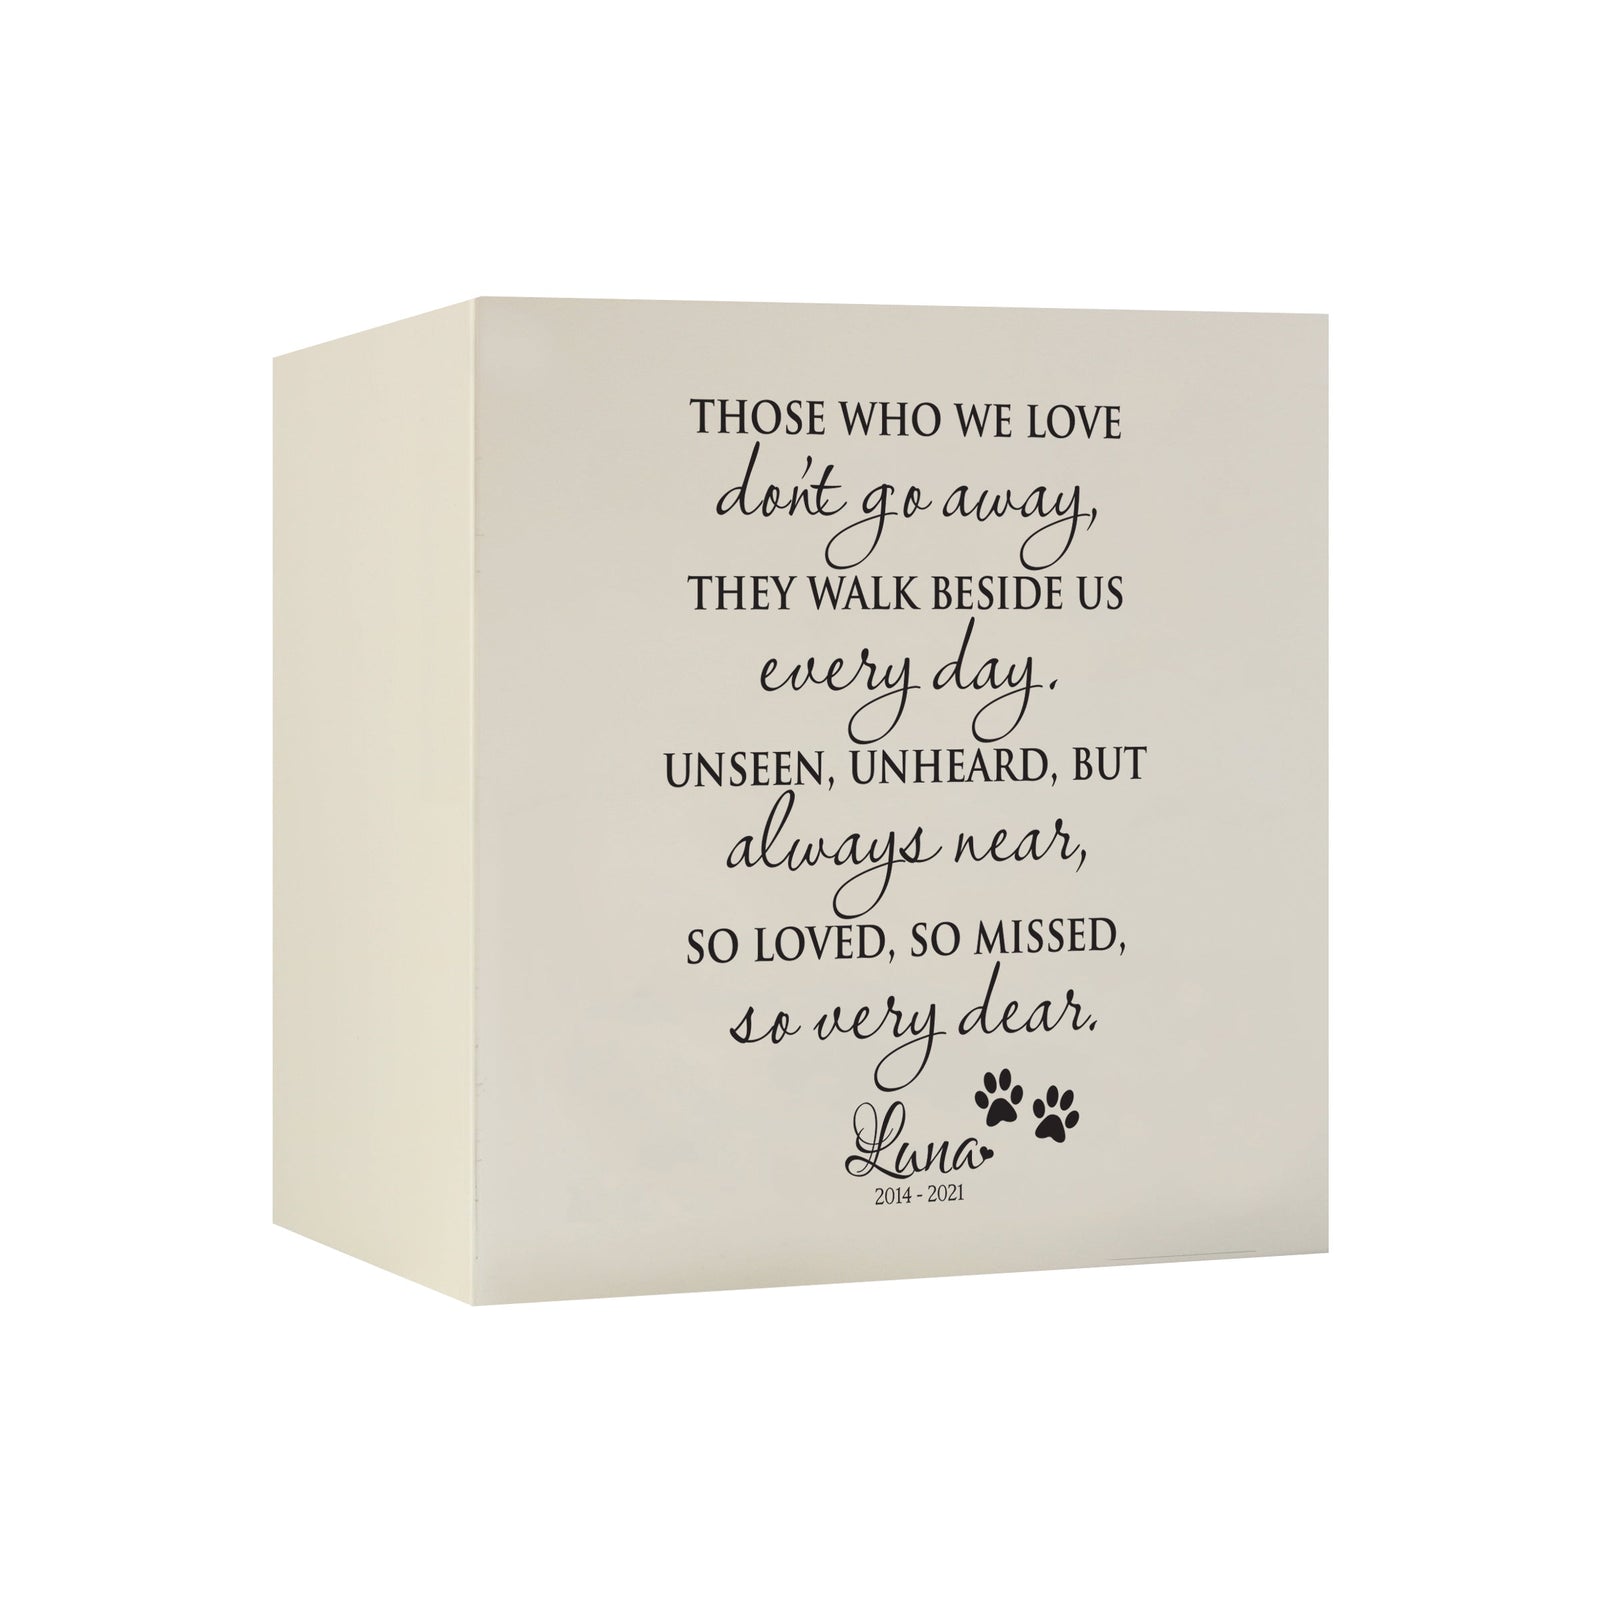 Pet Memorial Shadow Box Cremation Urn for Dog or Cat - Those Who We Love Don't Go Away